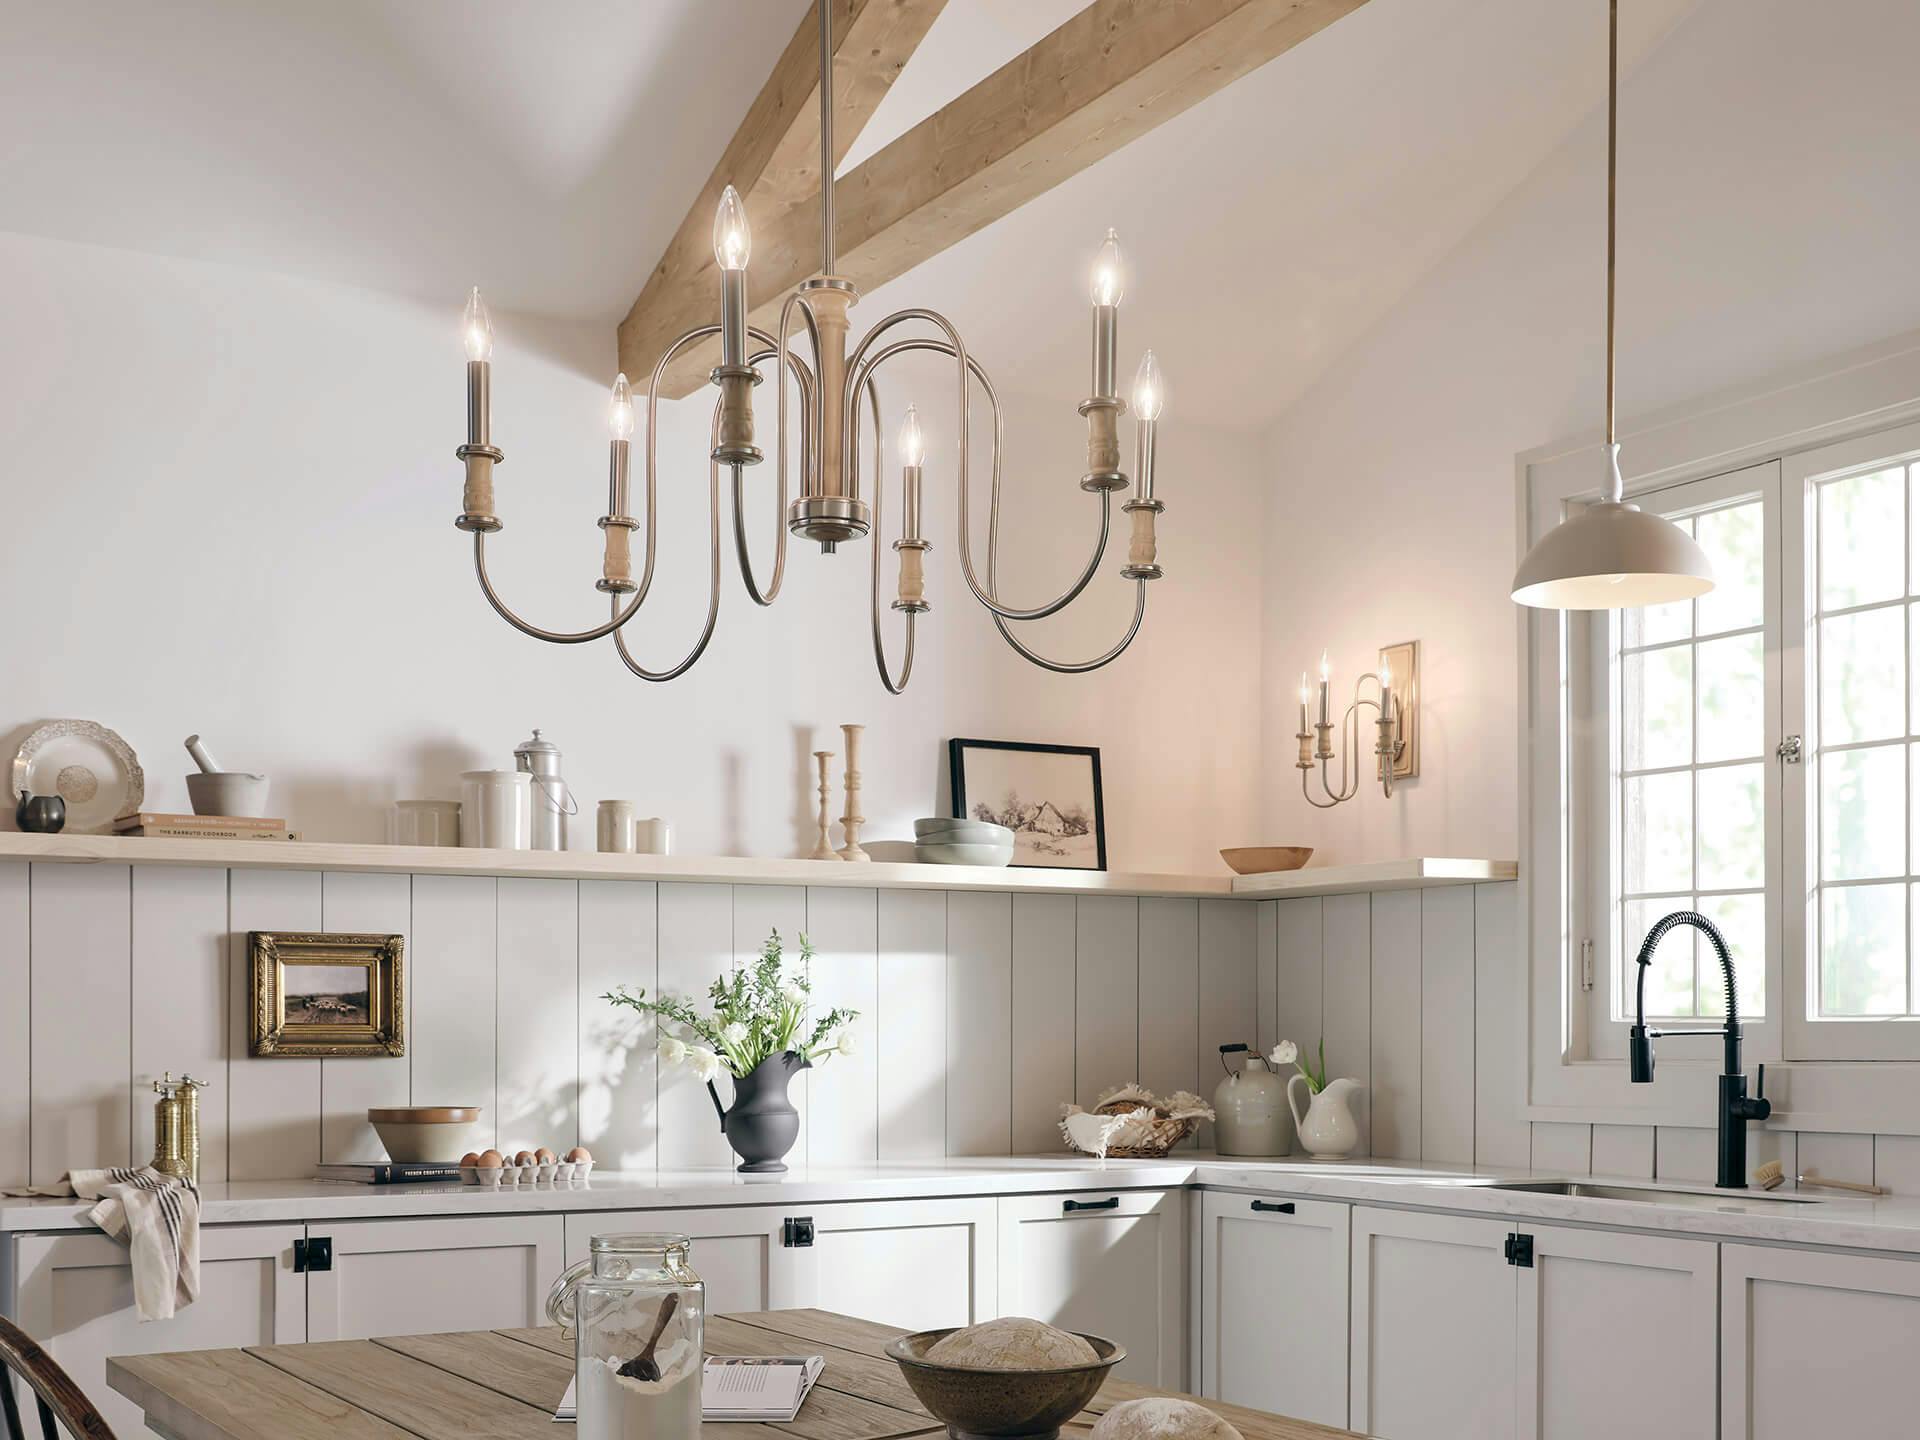 Daytime image of a rustic kitchen with Karthe chandelier